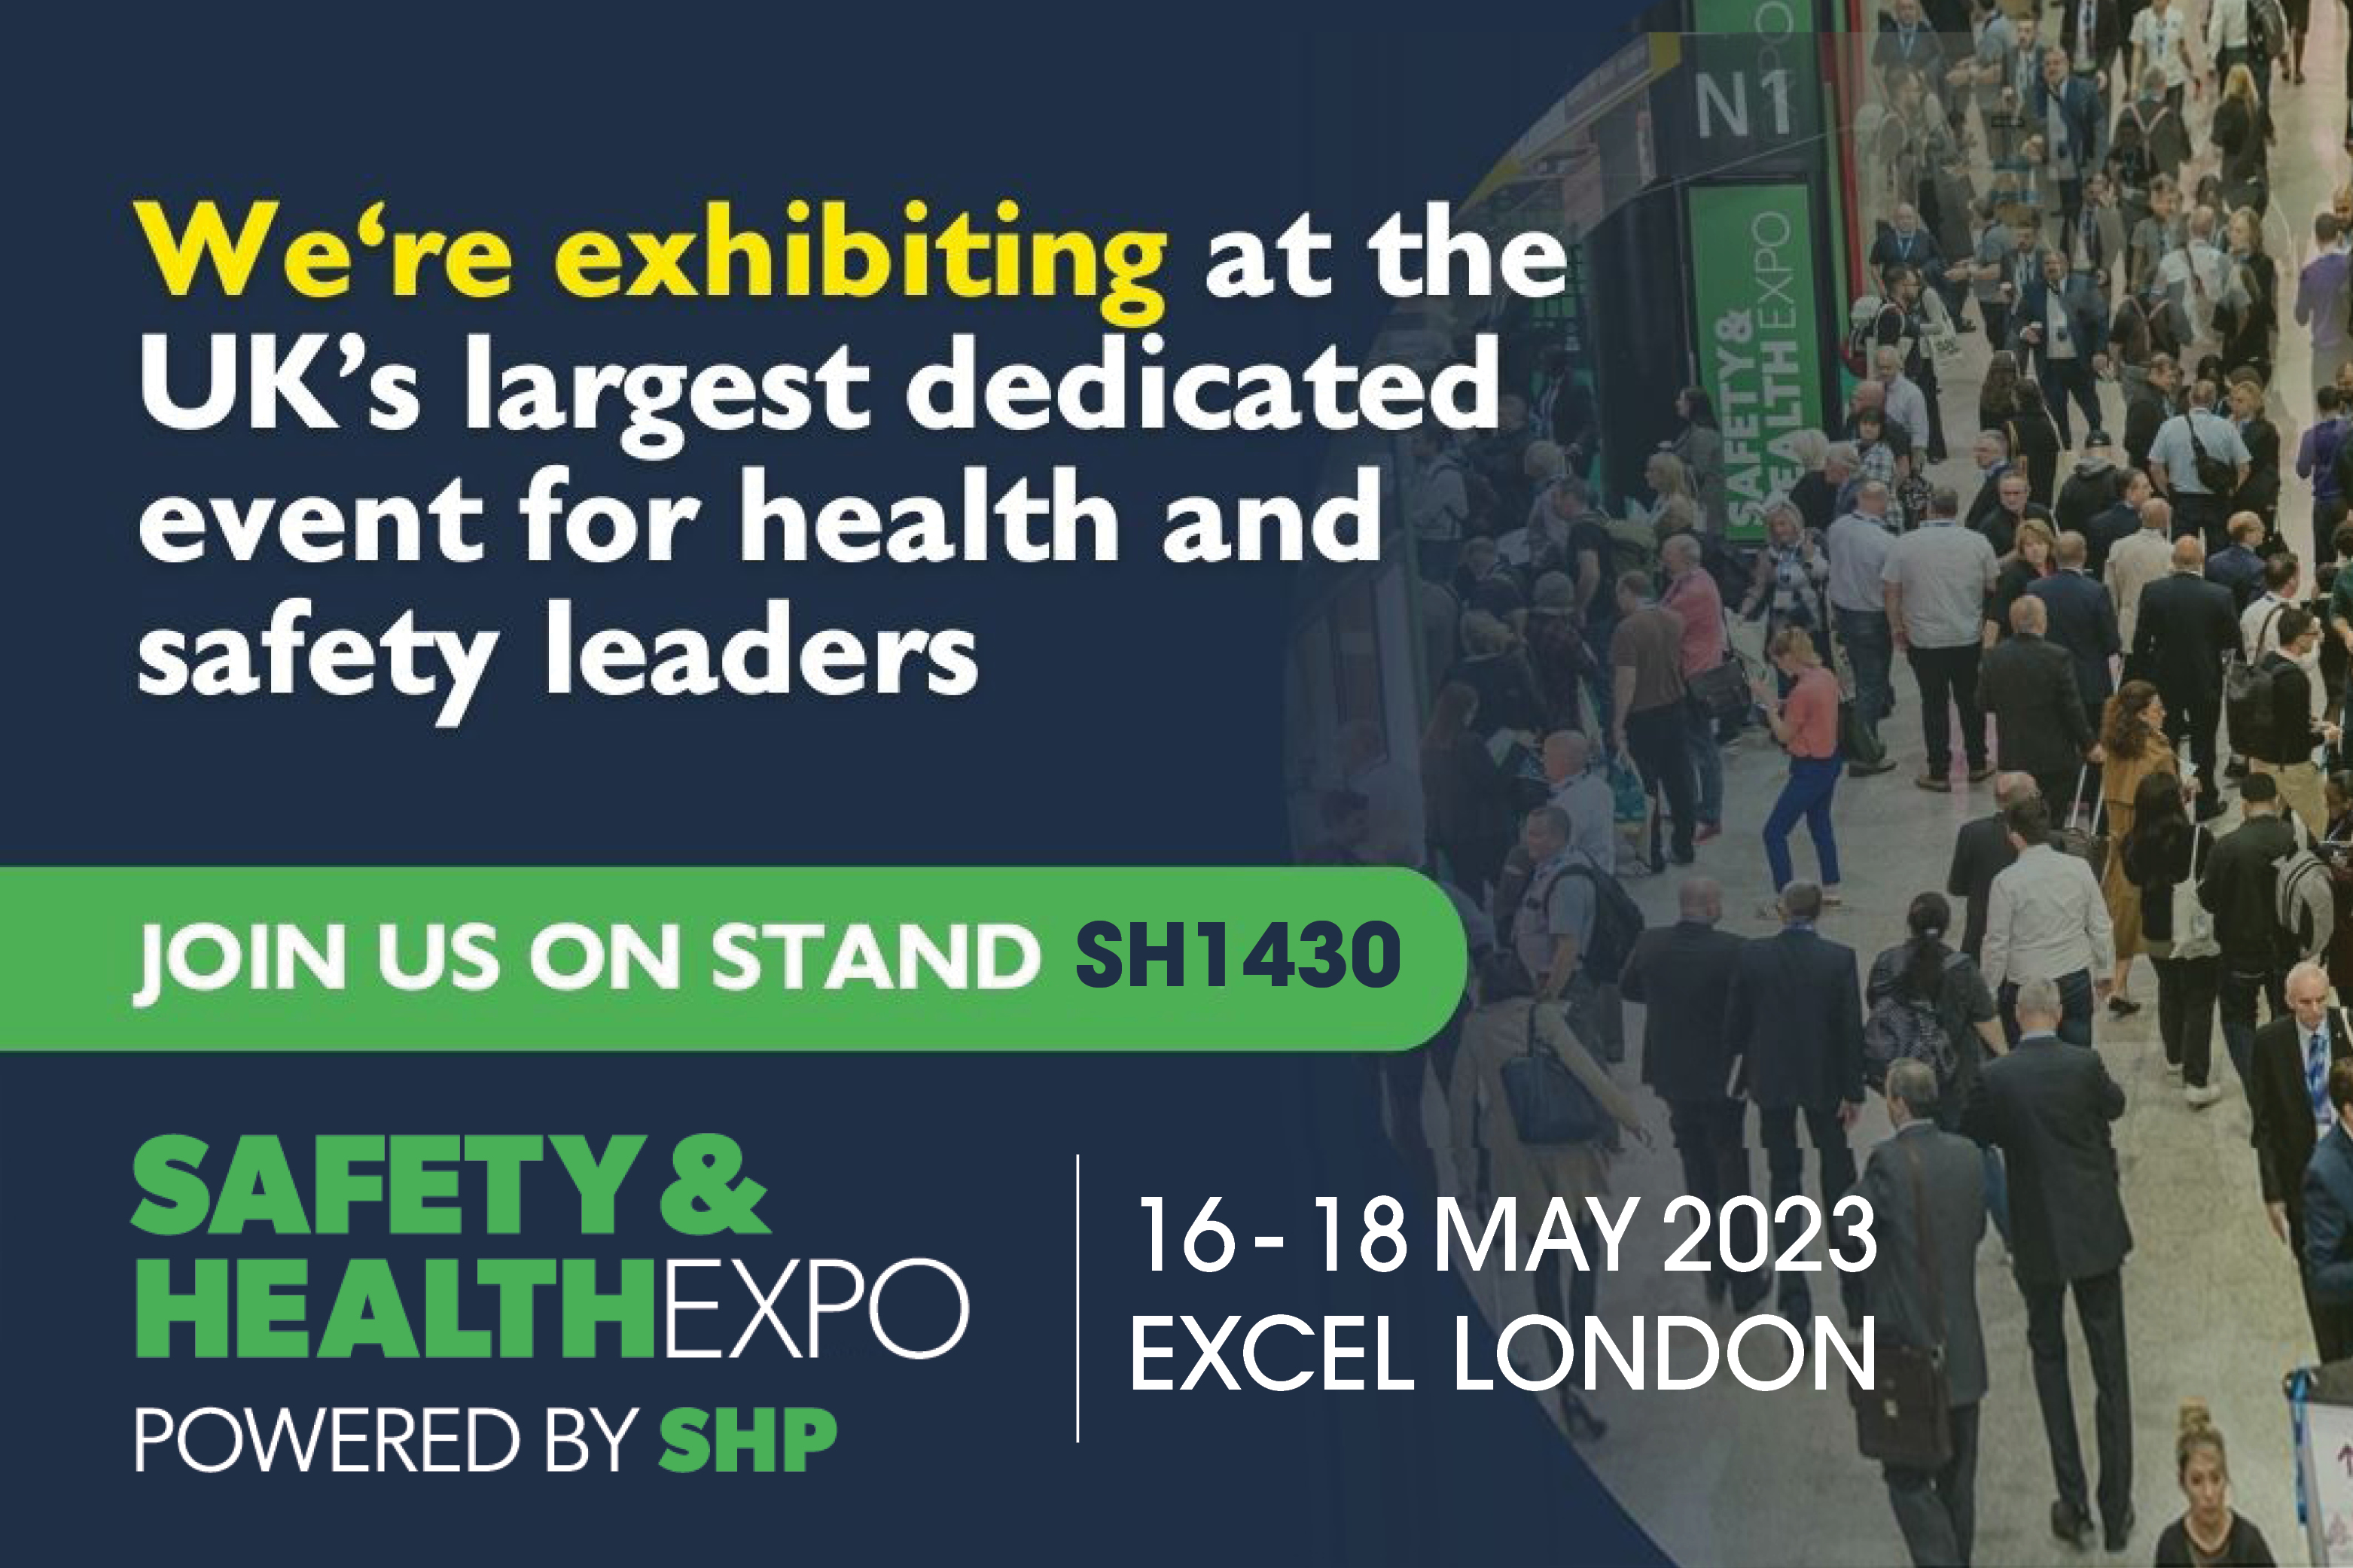 Safety & Health Expo 2023